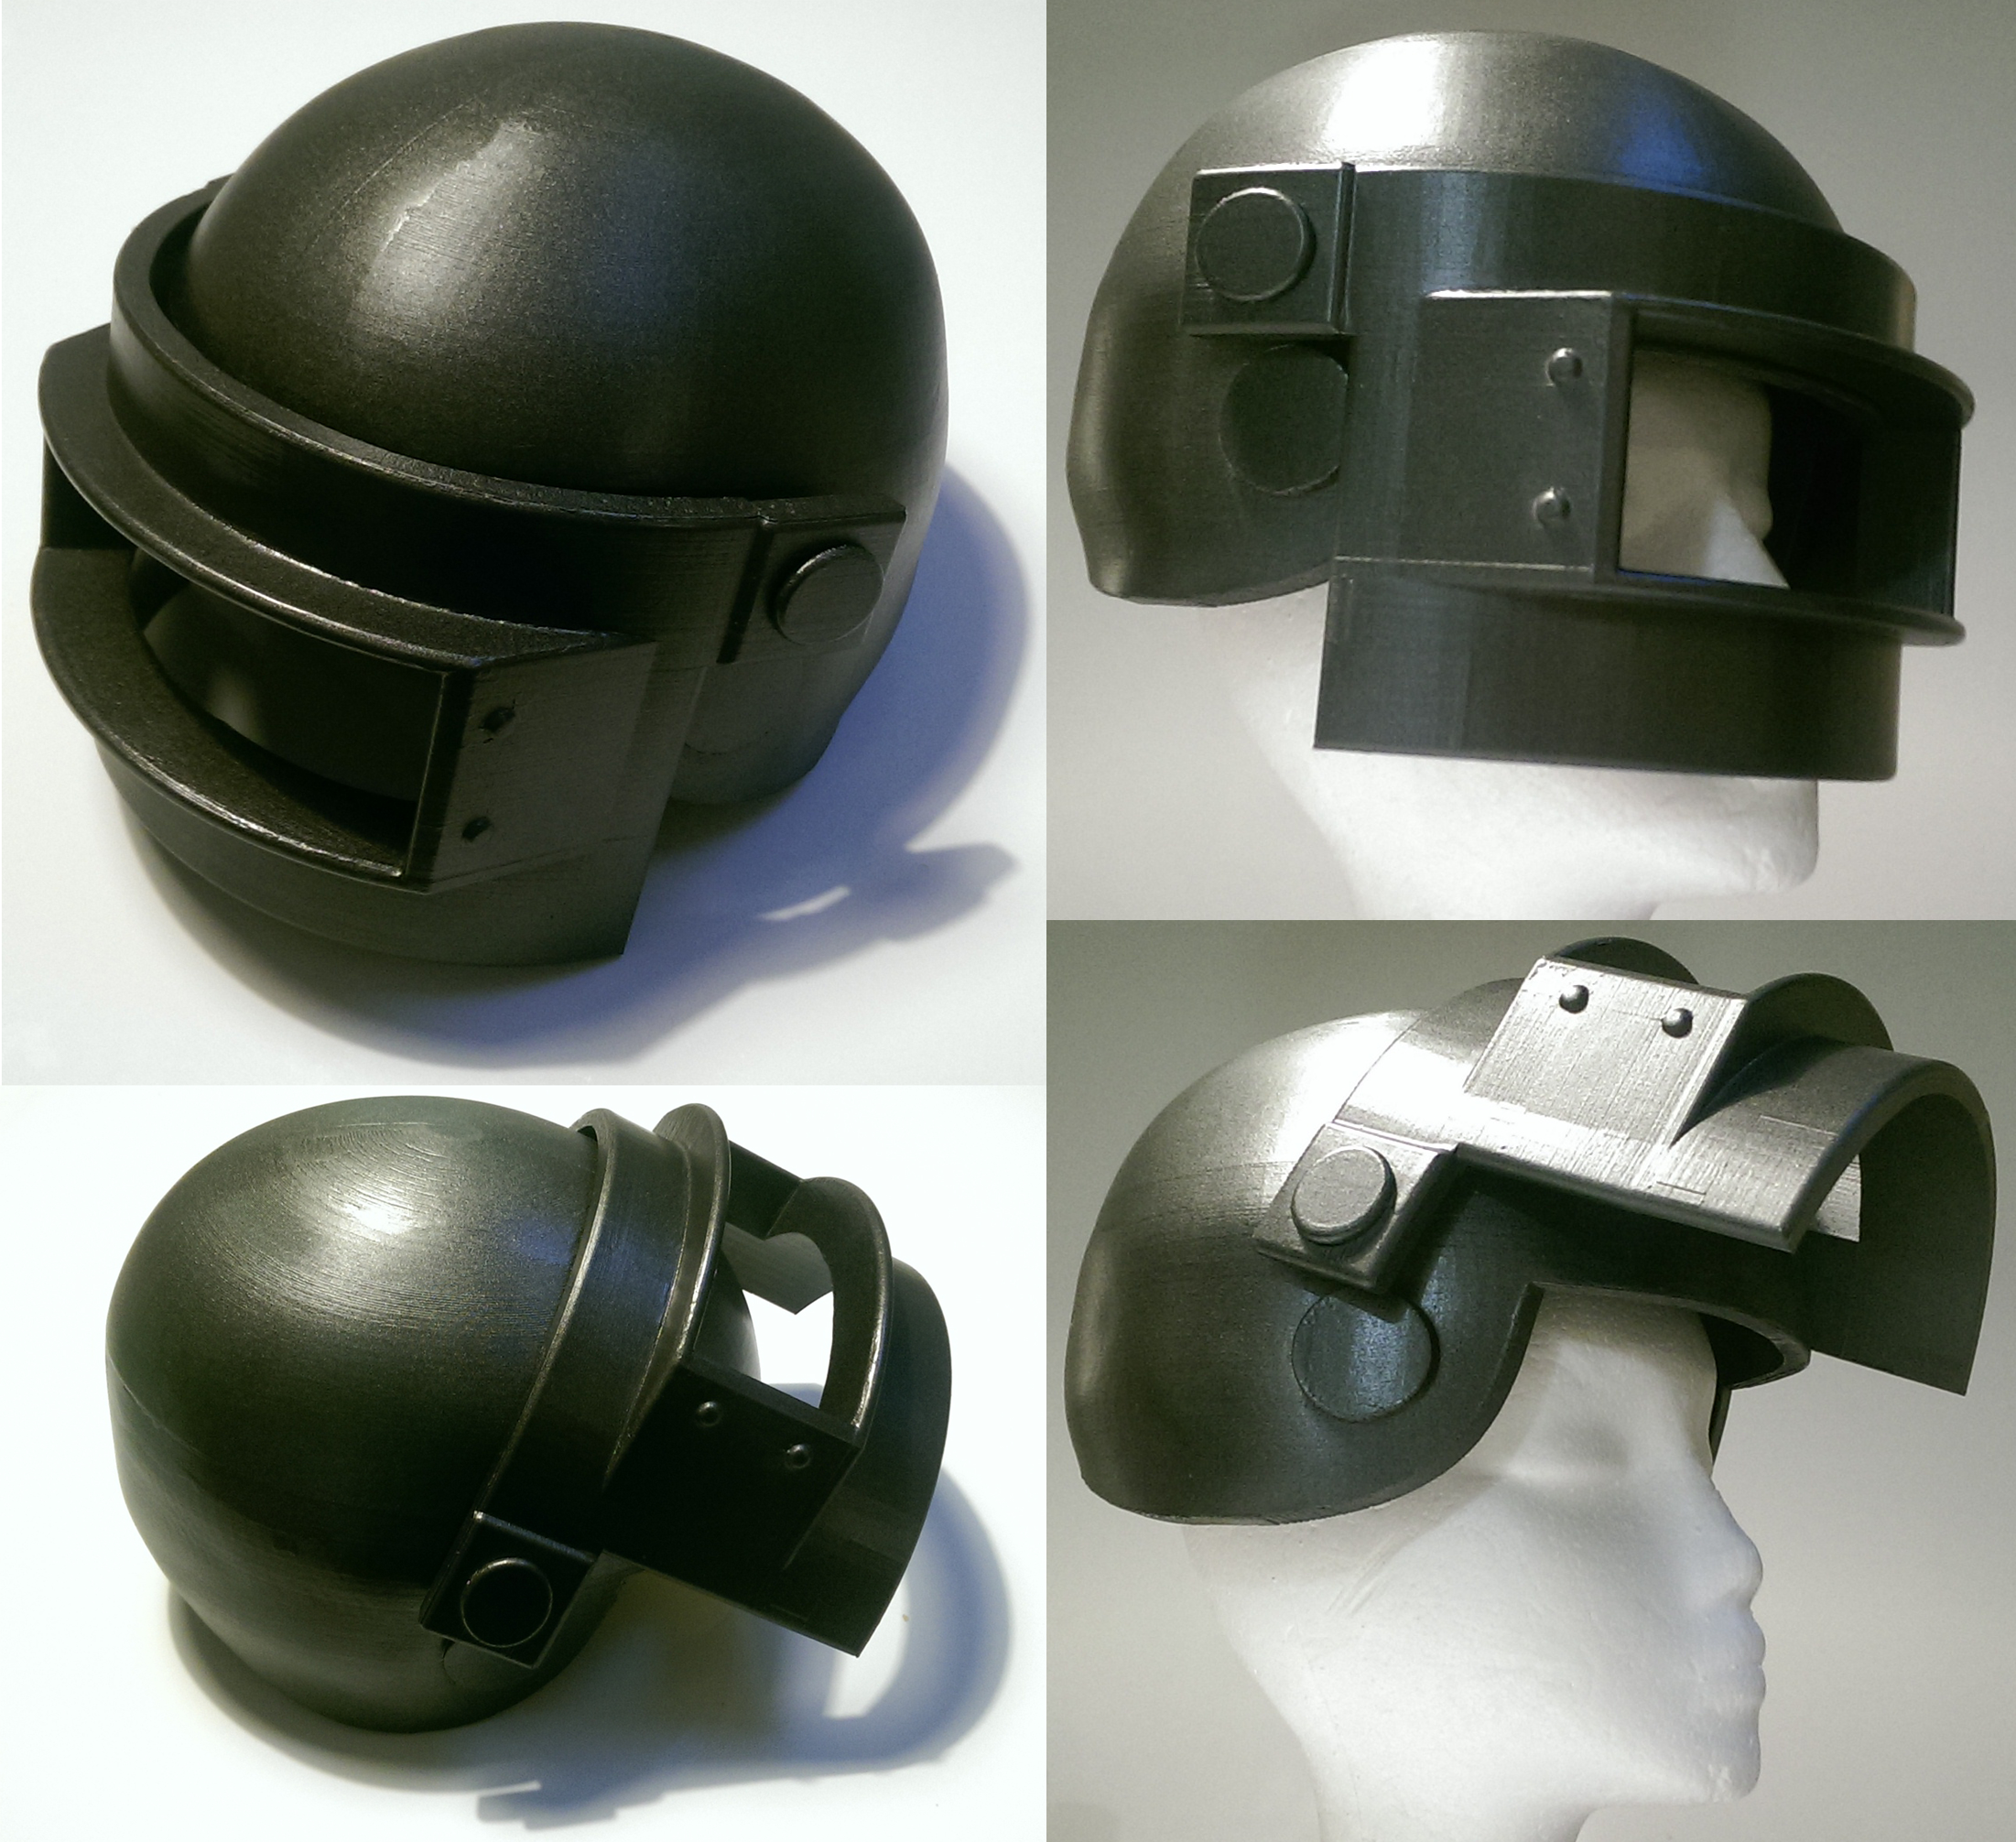 How to find a level 3 helmet in PUBG - Quora